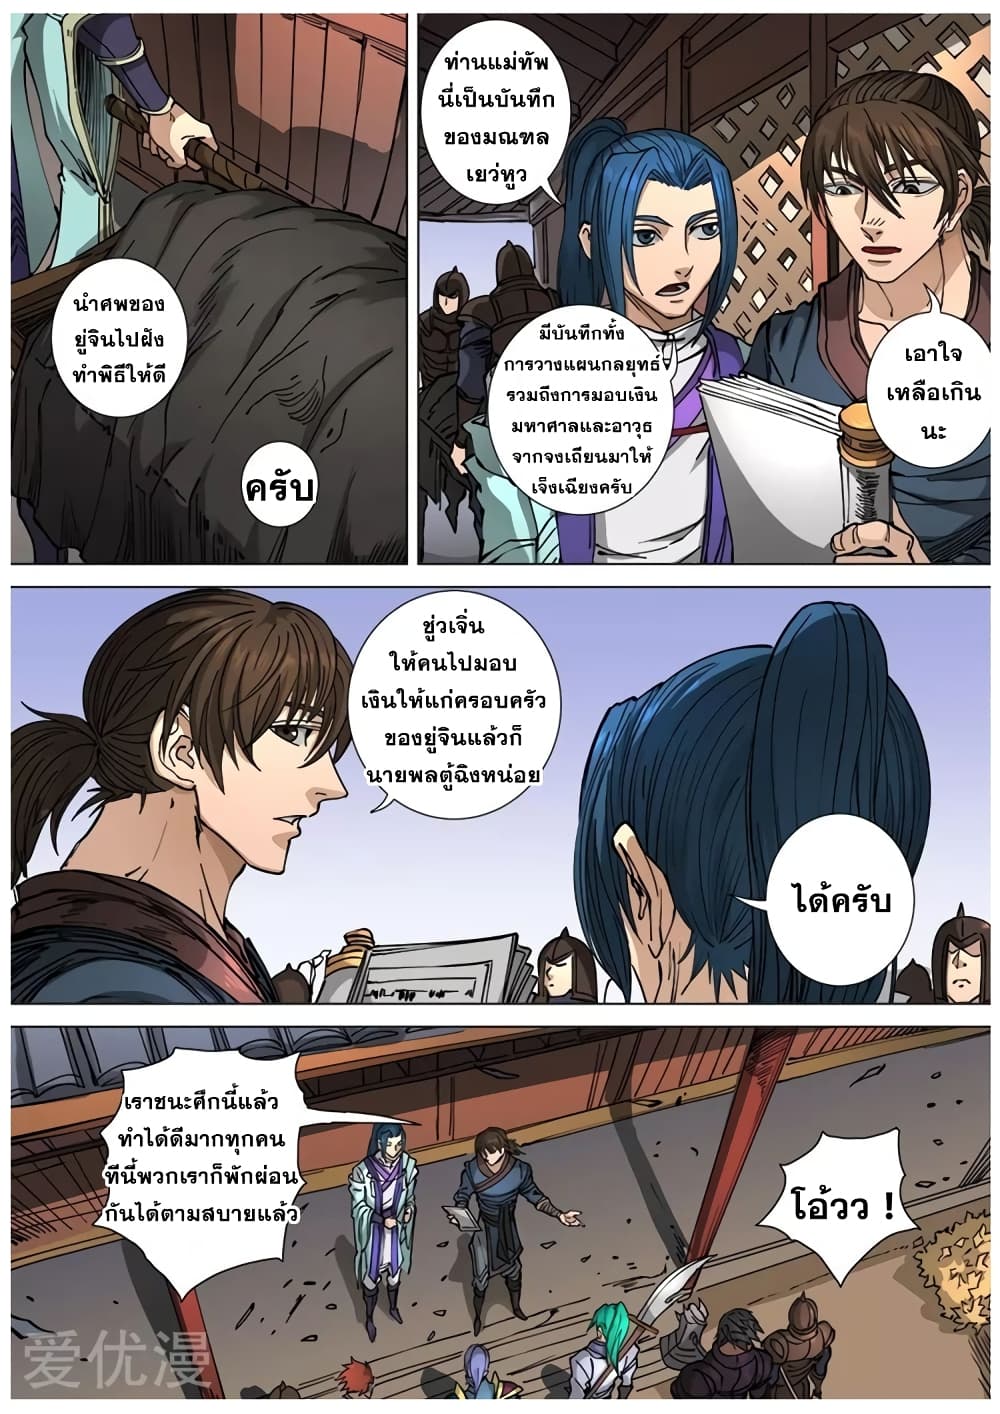 Tangyan in The Other World 111 (24)